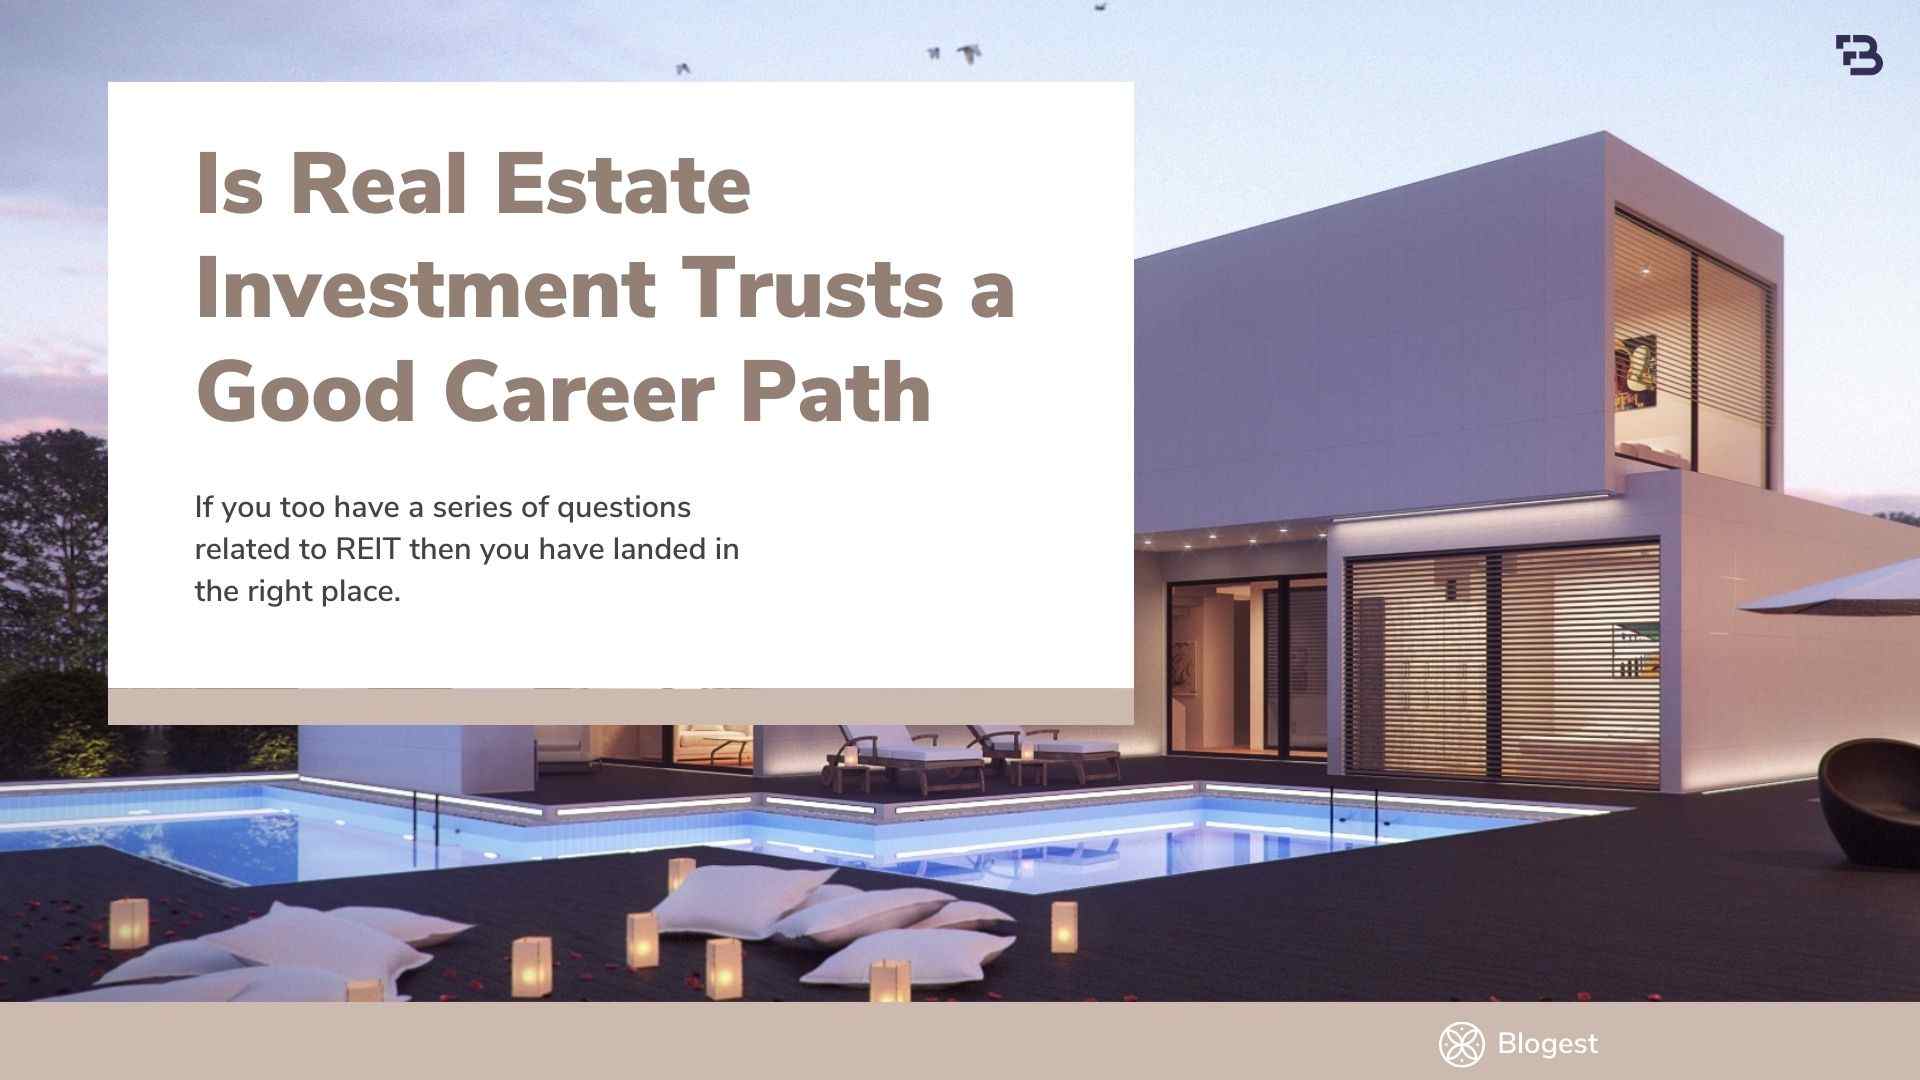 Is a Real Estate Investment Trusts a Good Career Path?